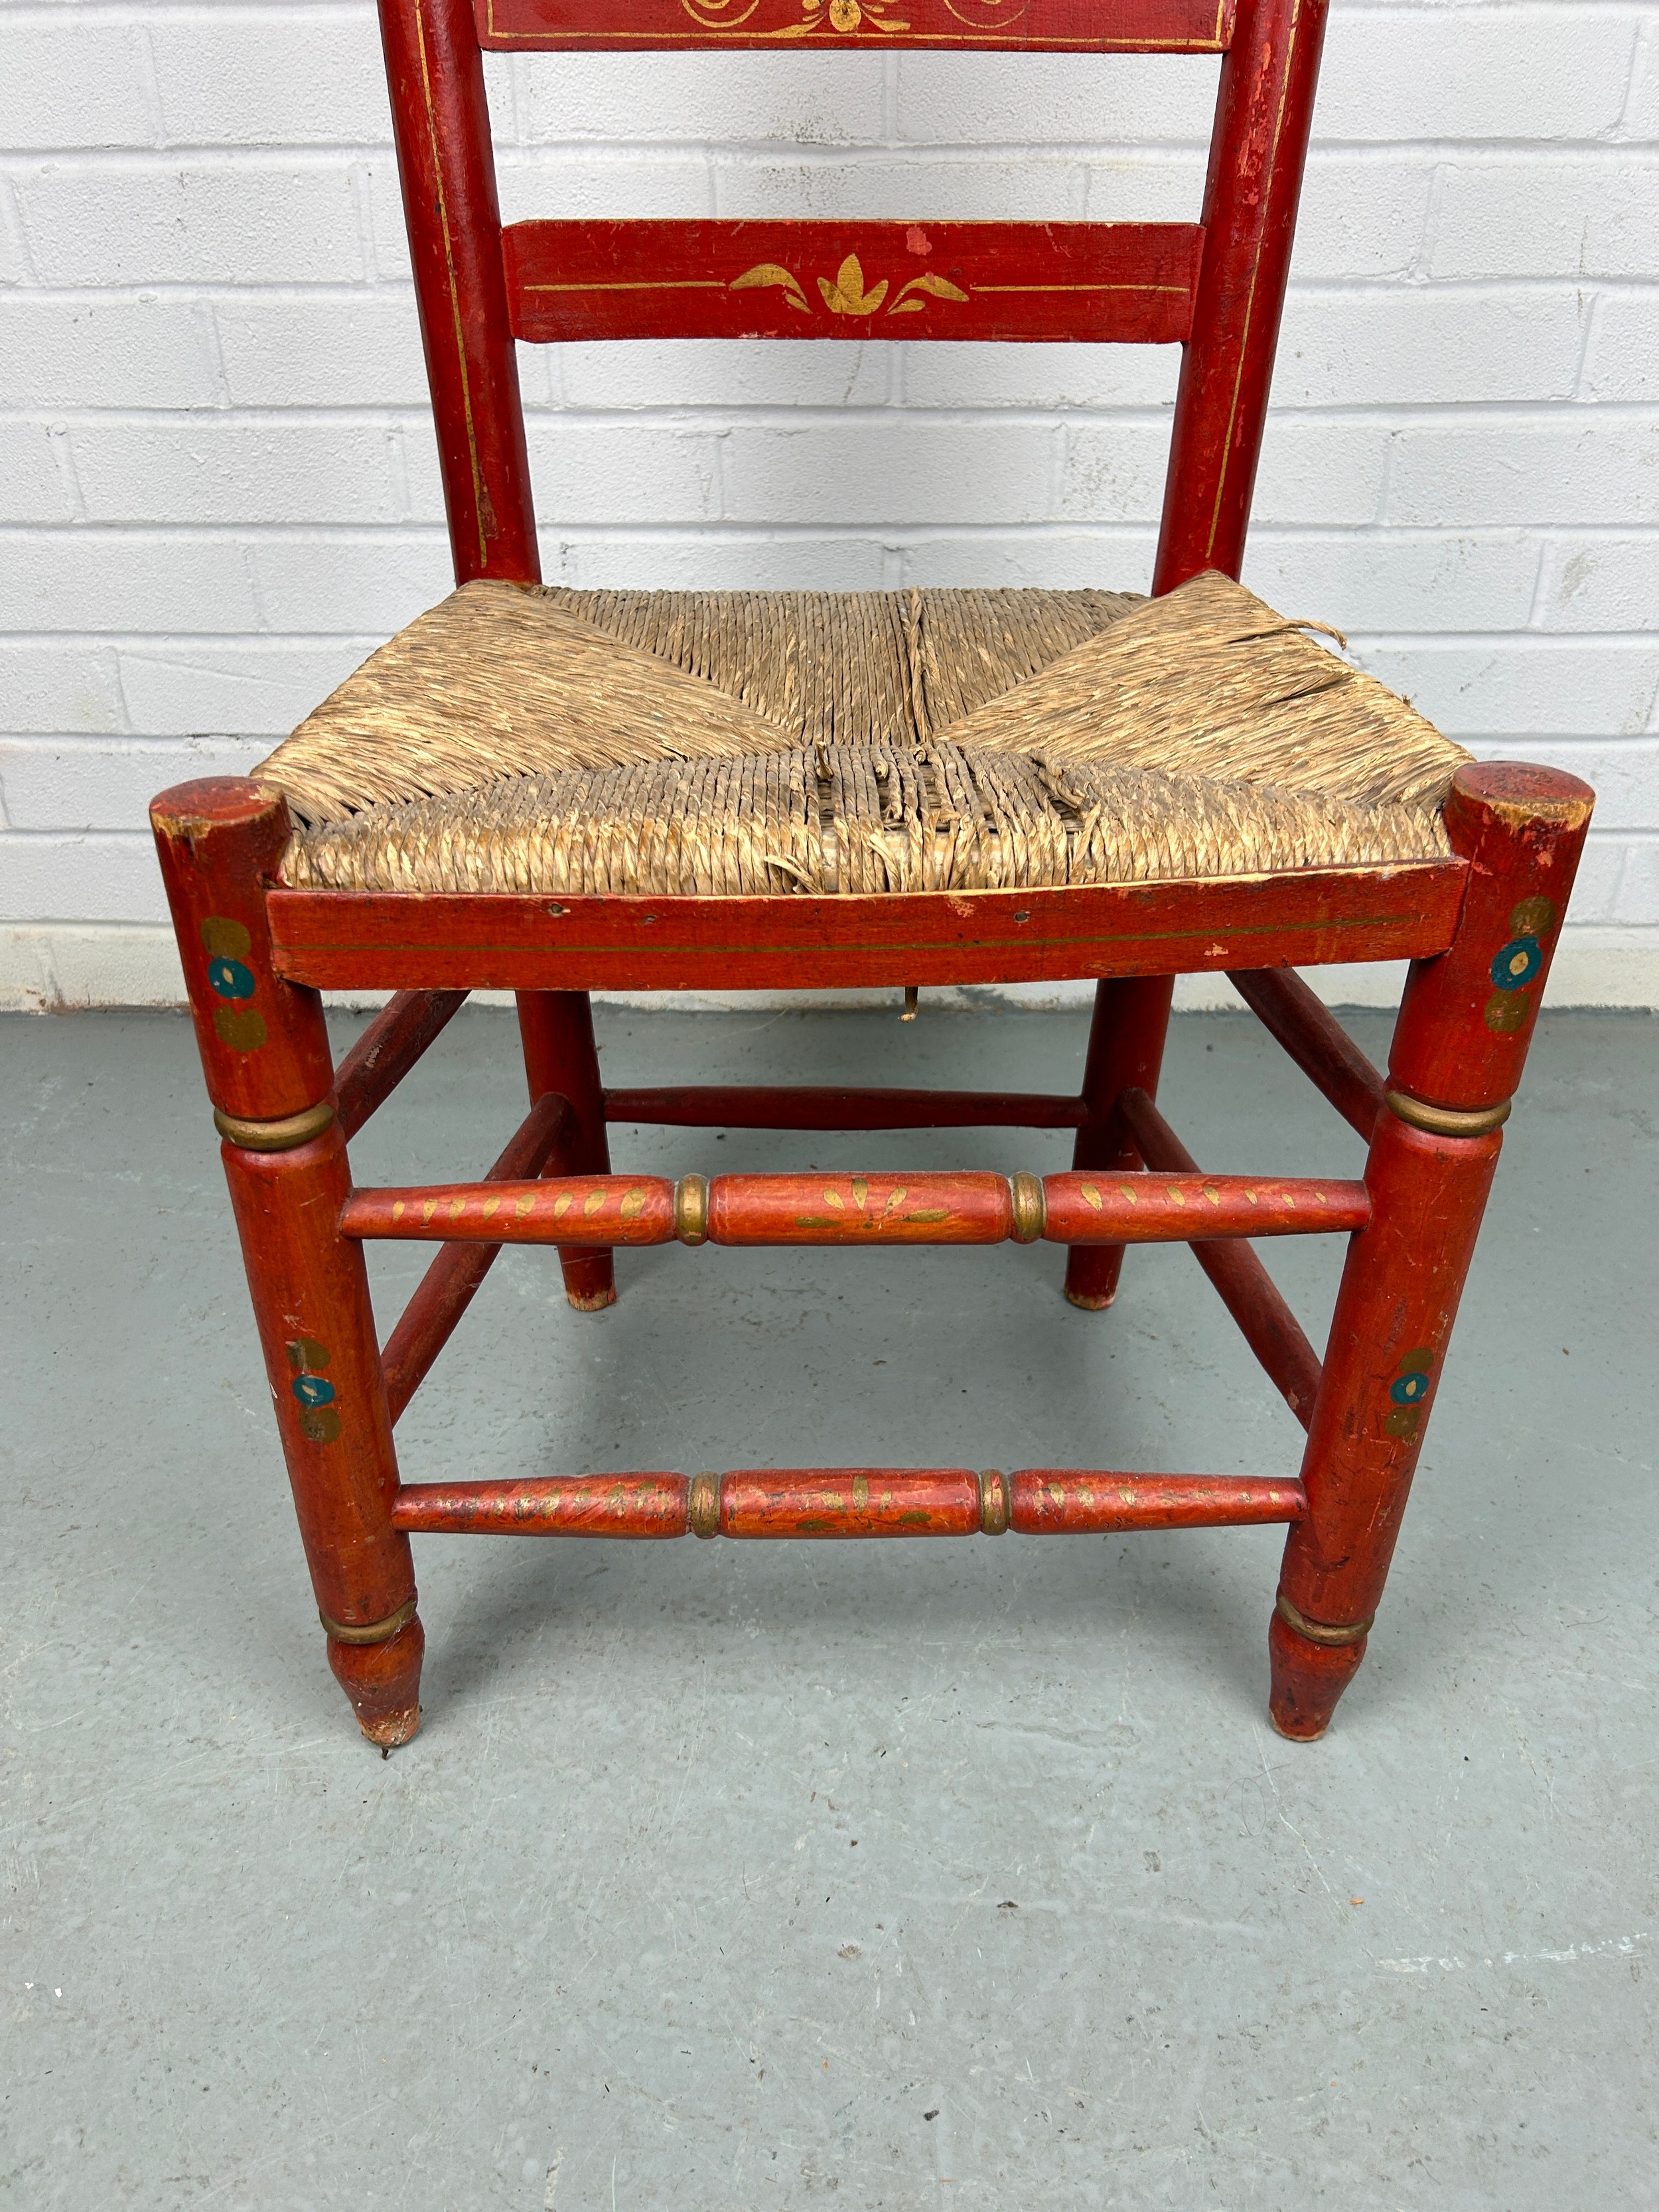 A RED SPANISH CHAIR WITH RUSH SEAT PAINTED WITH SCENE OF A MATADOR, 90cm x 40cm x 35cm - Image 4 of 5